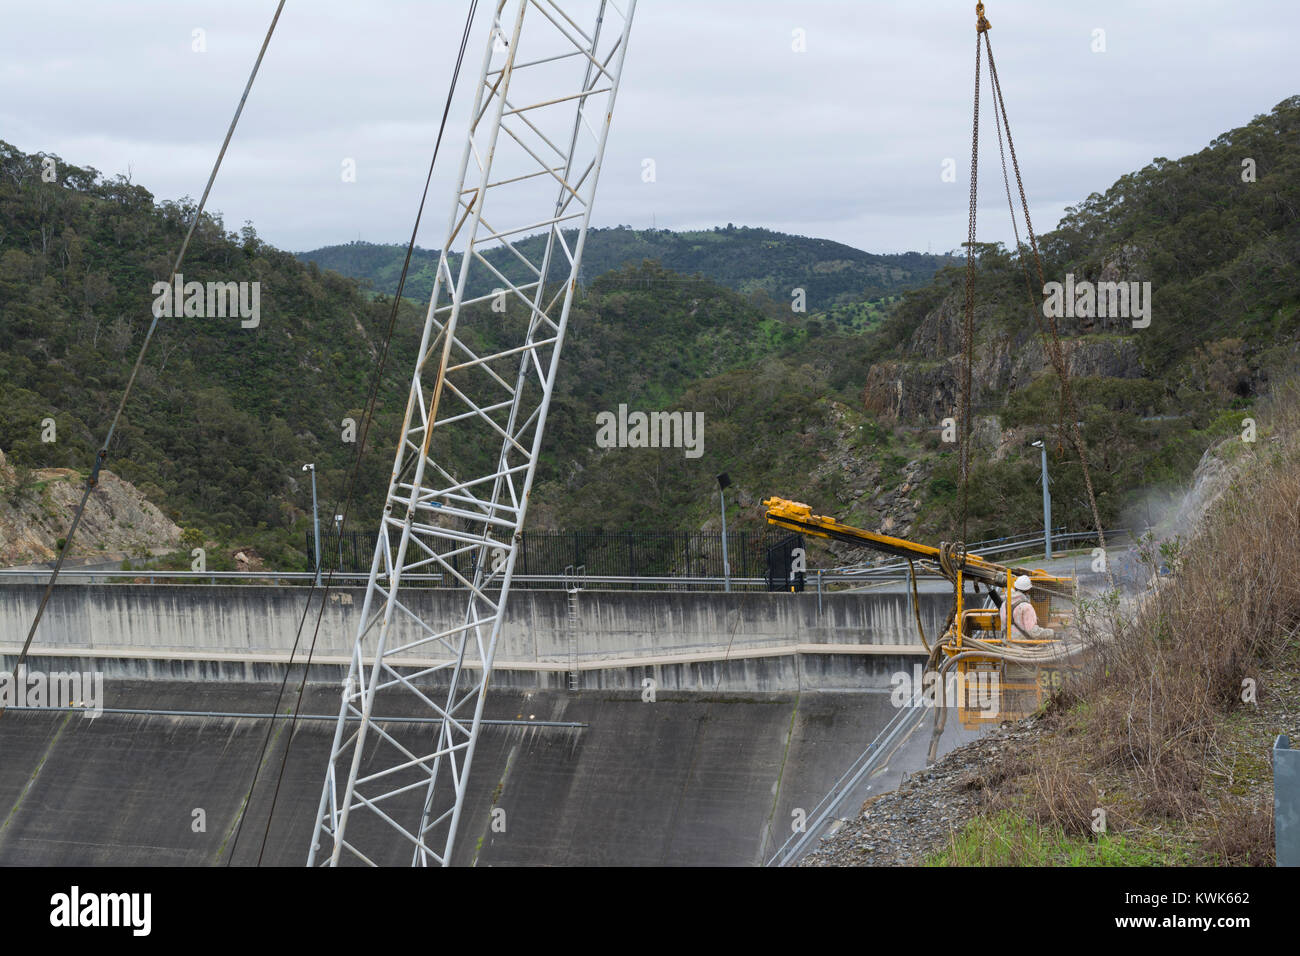 Adelaide Hills, SA, Australia - Sep 10, 2016: Work man in a crane workbox suspended by the crane, working on the the dam upgrade at Kangaroo Creek Res Stock Photo